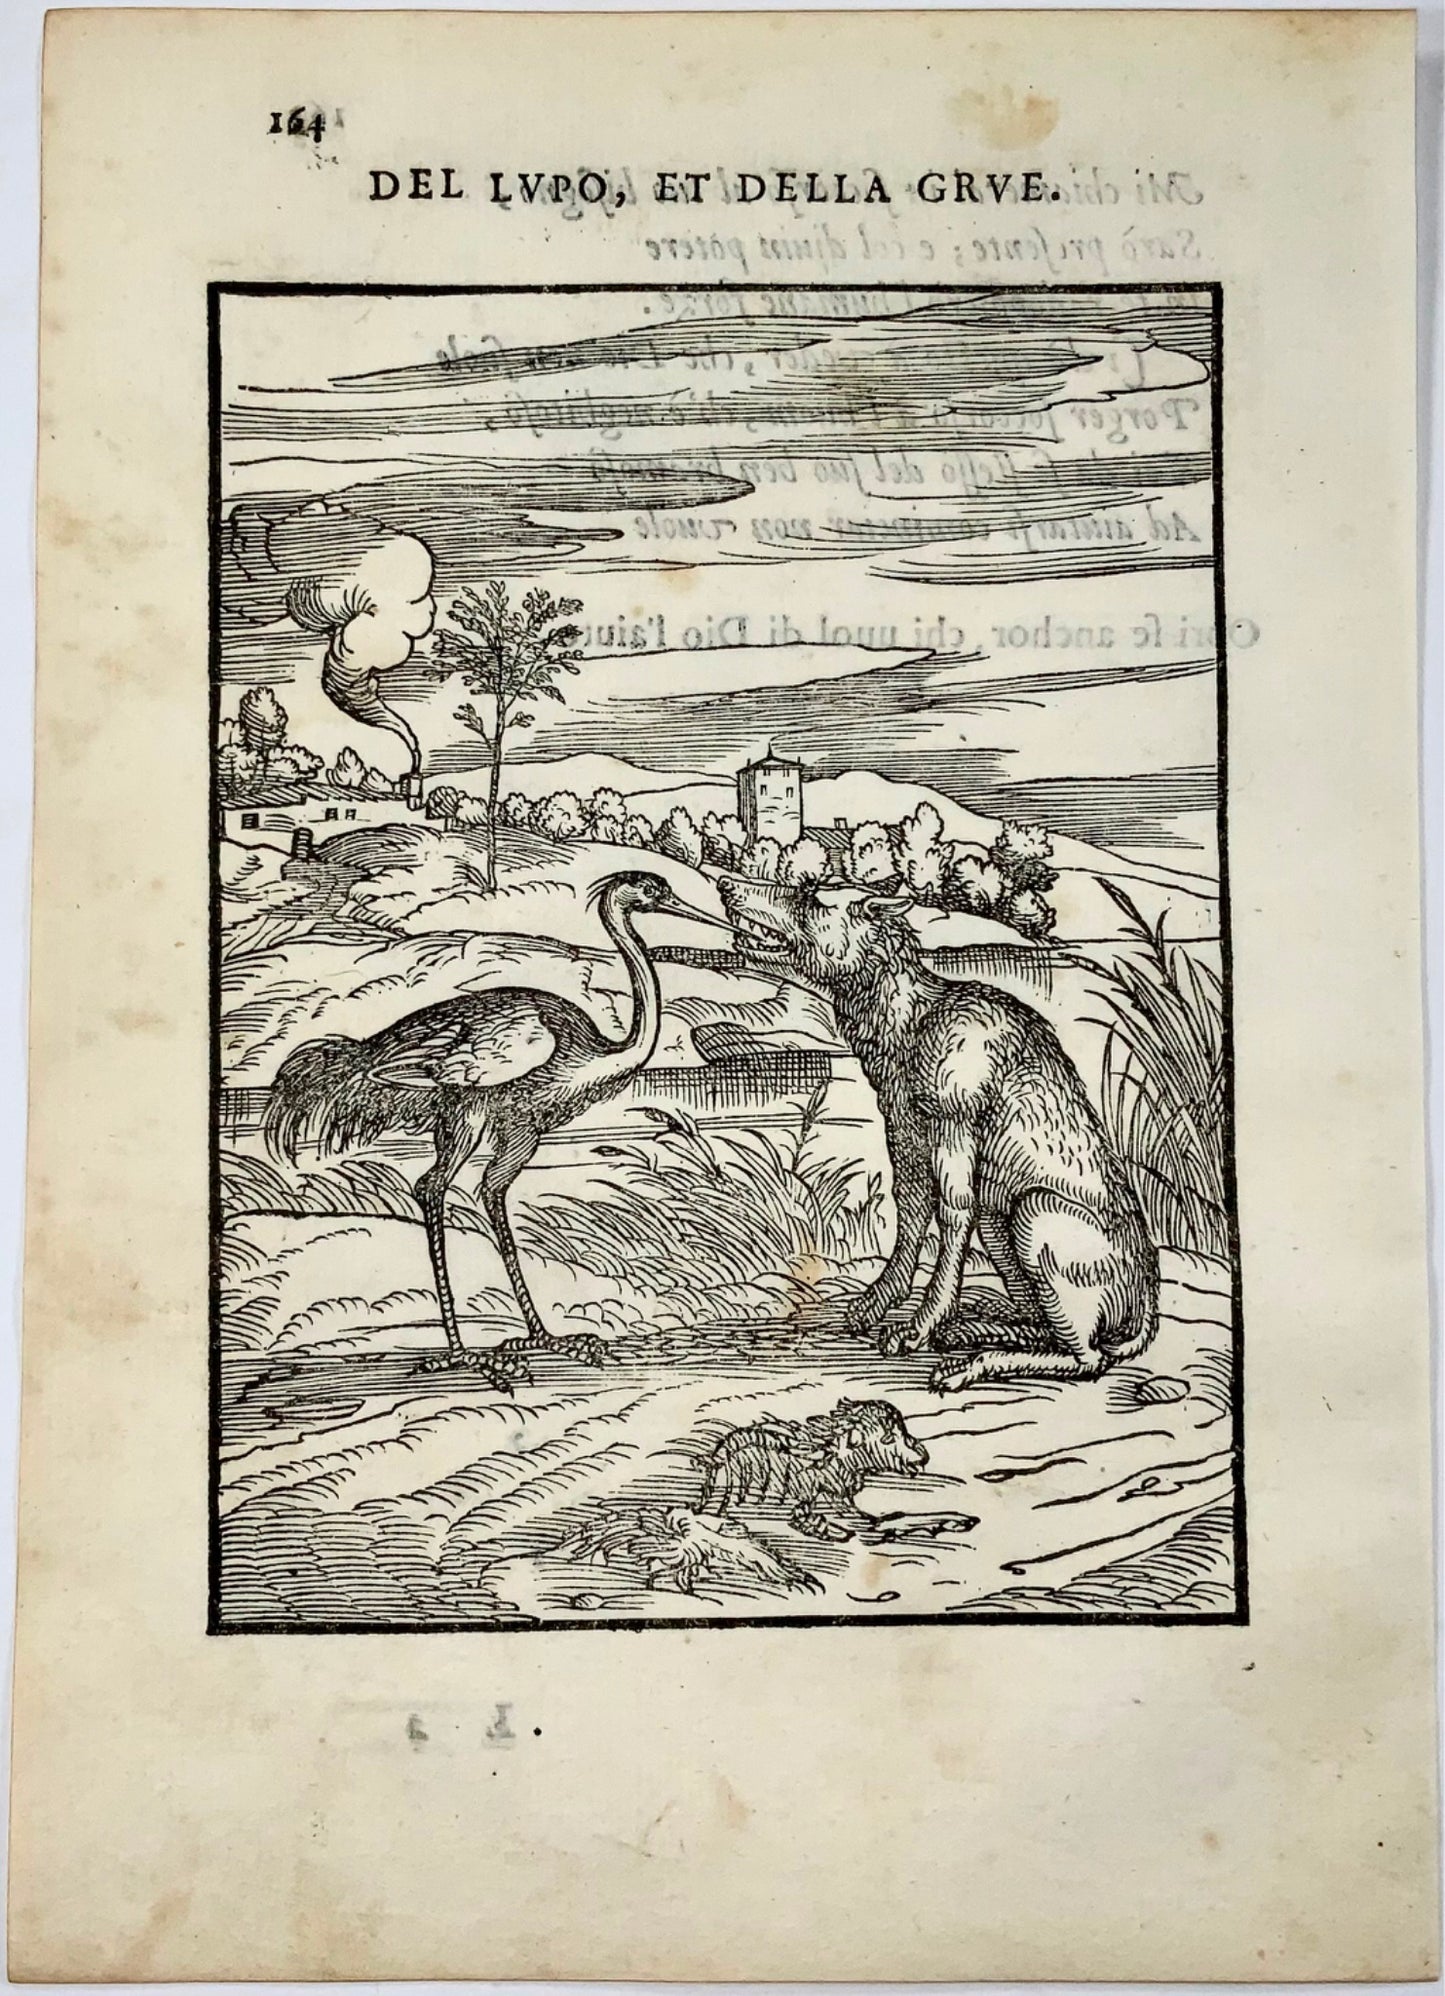 1570 The Wolf and the Heron, Verdizotti (b 1525), woodcut, fable, art